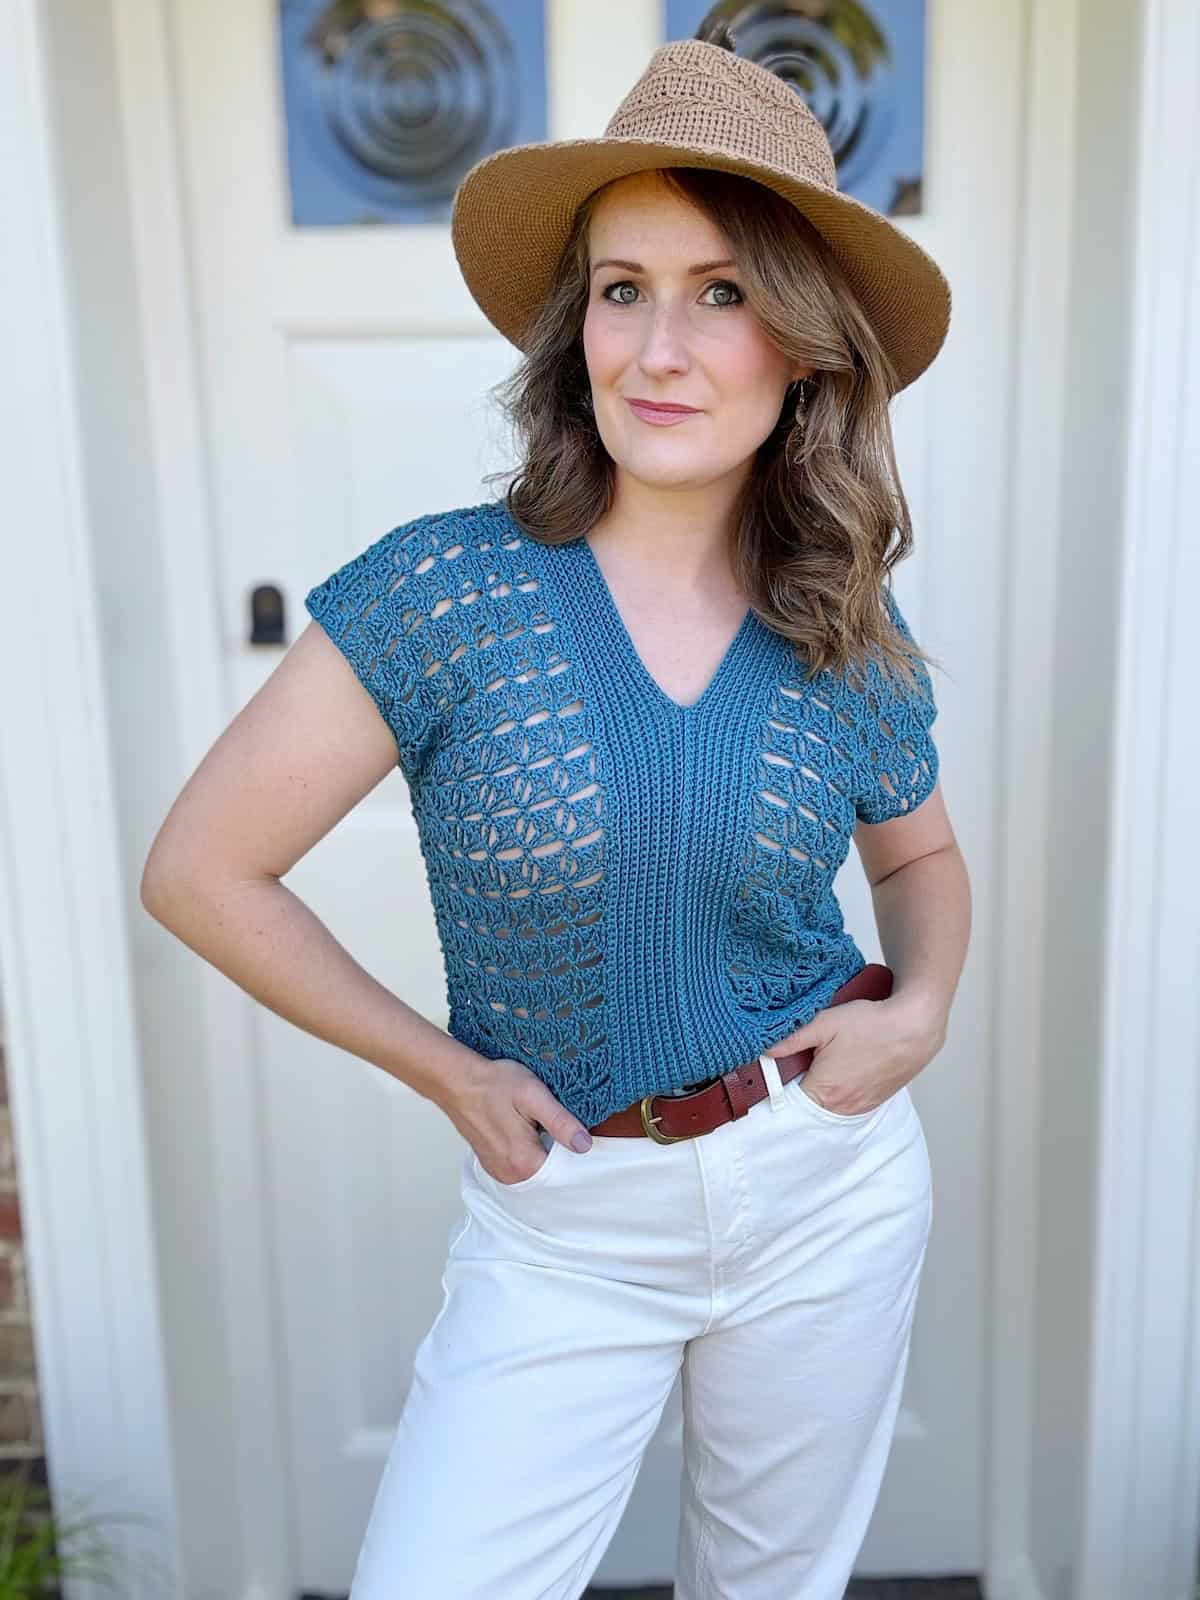 Person standing in front of a door, wearing a blue crocheted top, white pants, brown belt, and a straw hat.